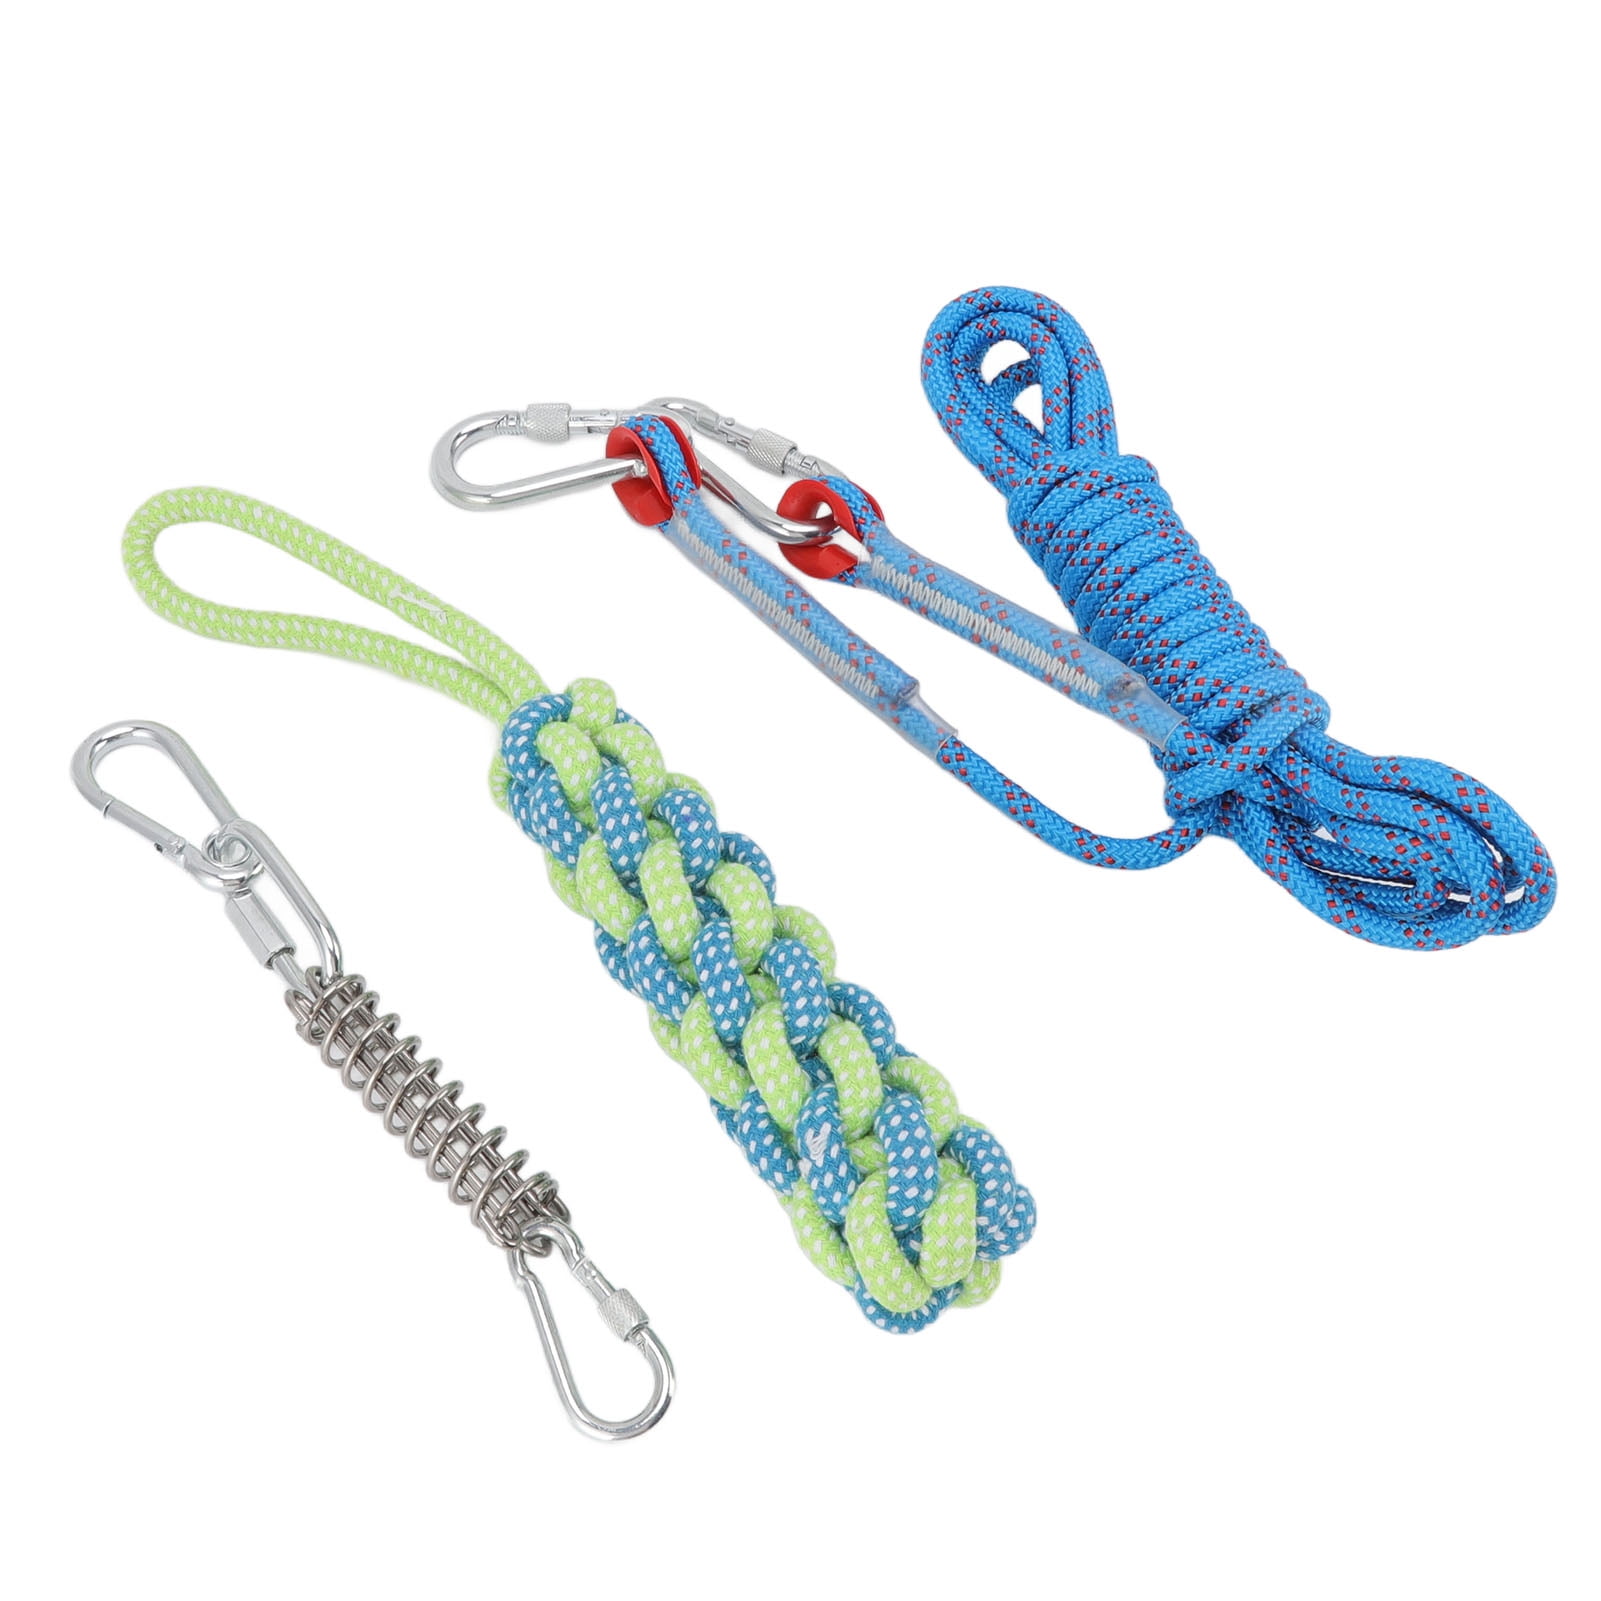 QINGFANGLI Spring Pole Dog Rope Outdoor Tug of War Toy for Pitbull Medium  to Large Dogs Bungee Hanging Exercise Ropes Muscle Builder Interactive Toys